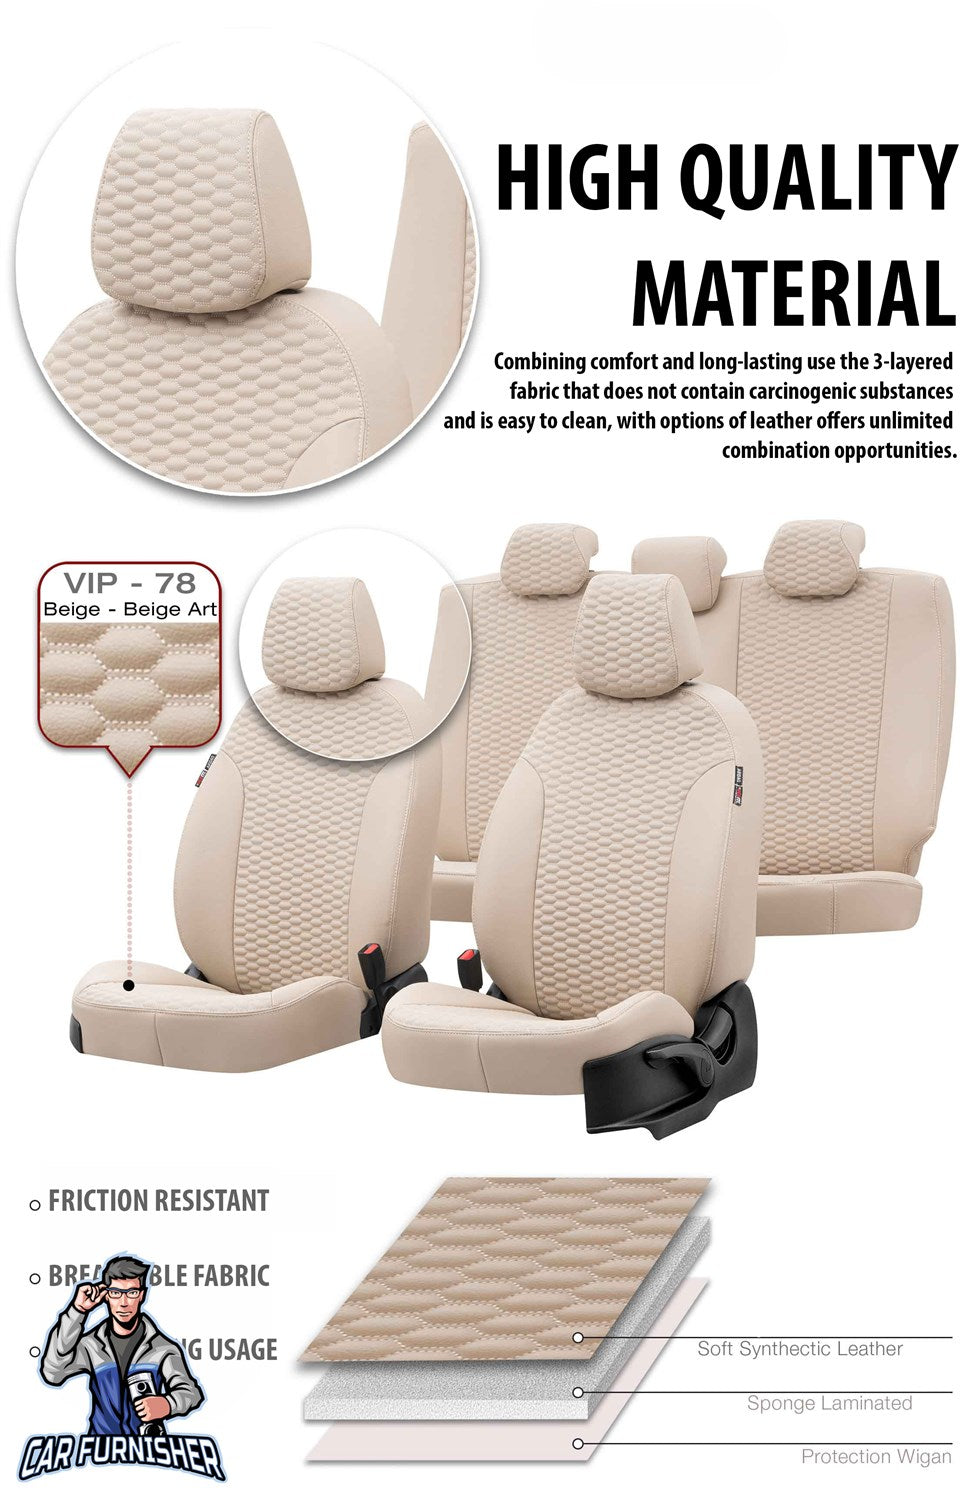 Hyundai H1 Seat Covers Tokyo Leather Design Black Leather